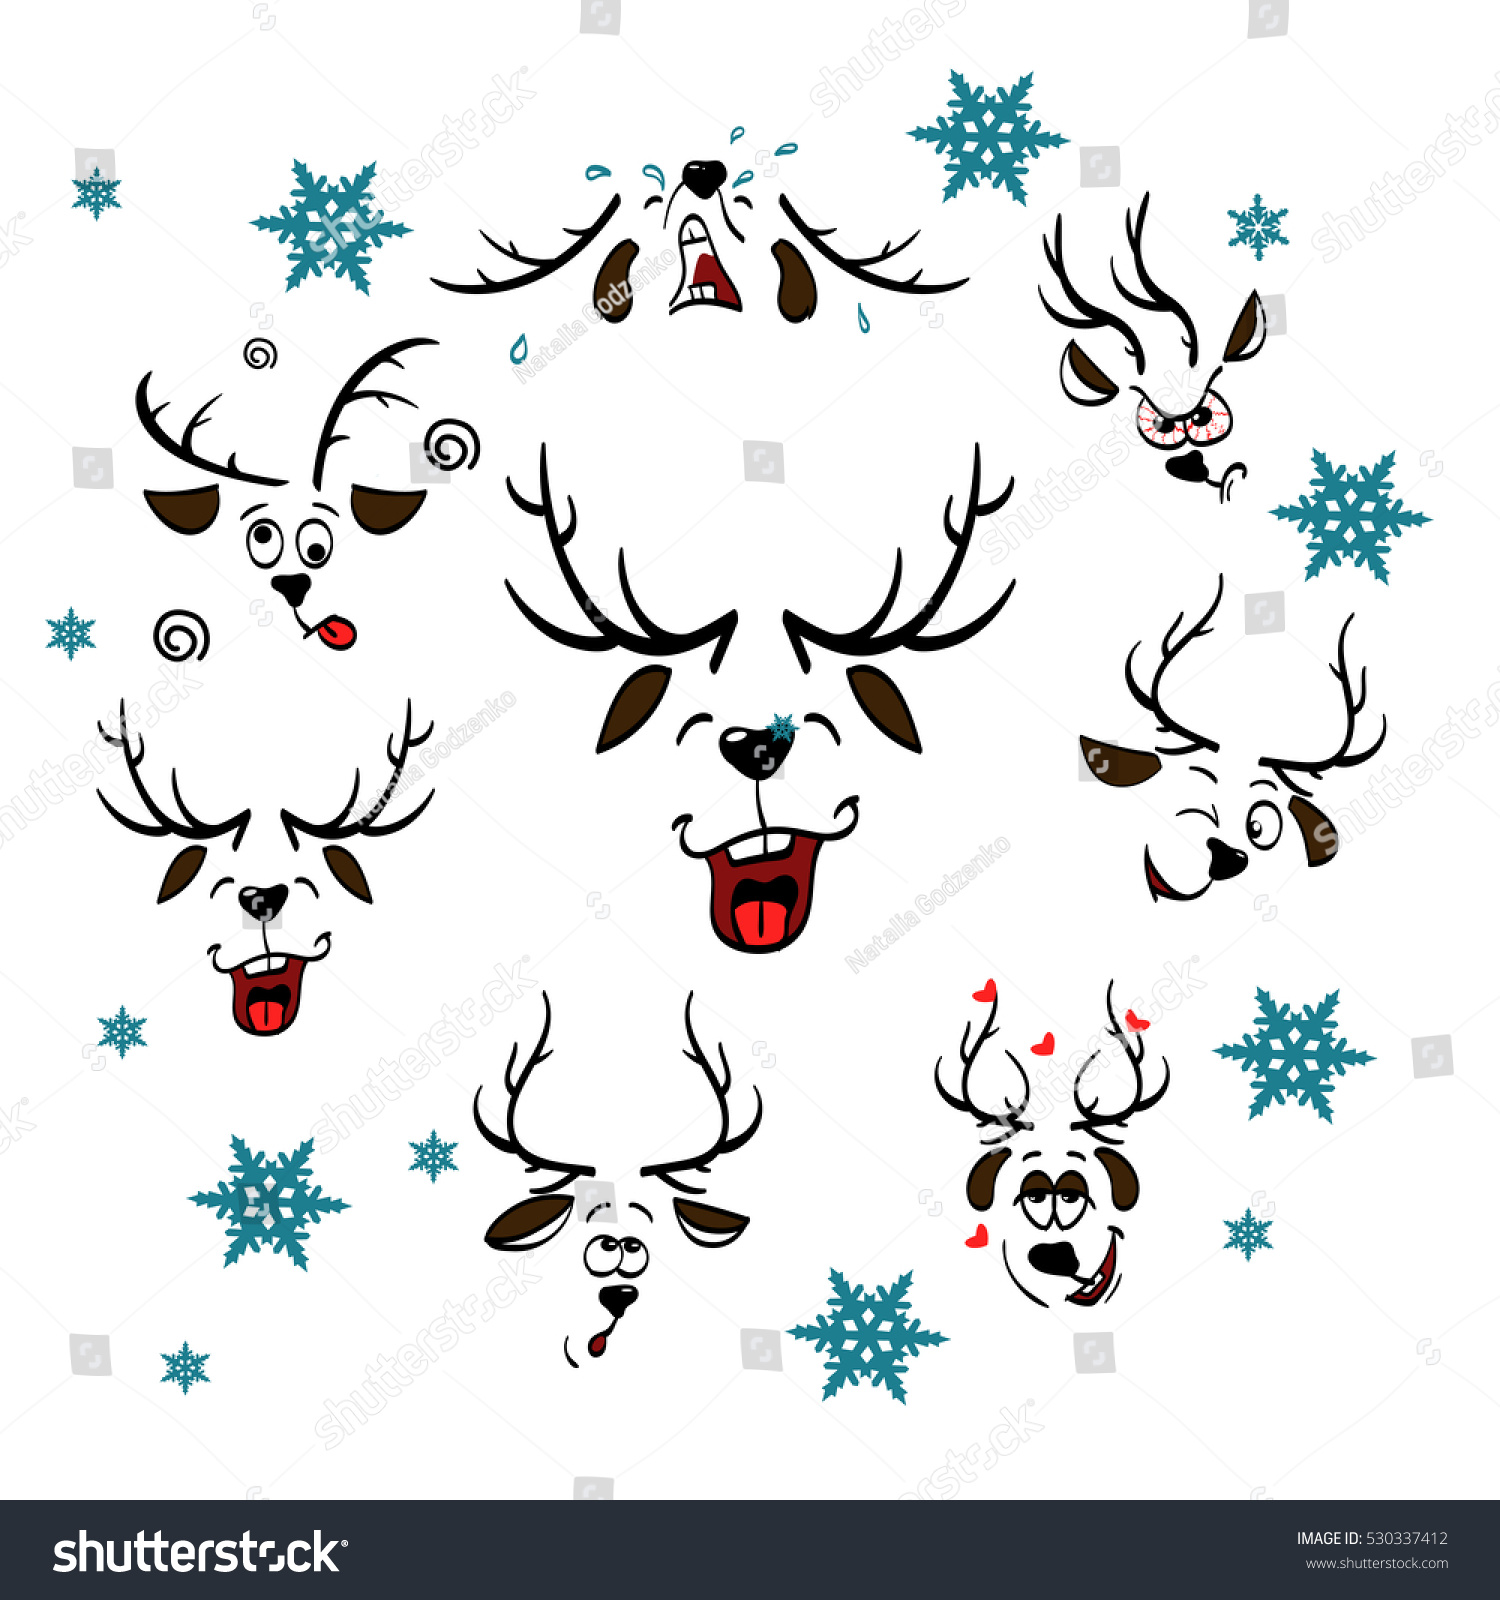 A set of Christmas deer faces with different emotions Christmas Deer Cartoon Emotion faces